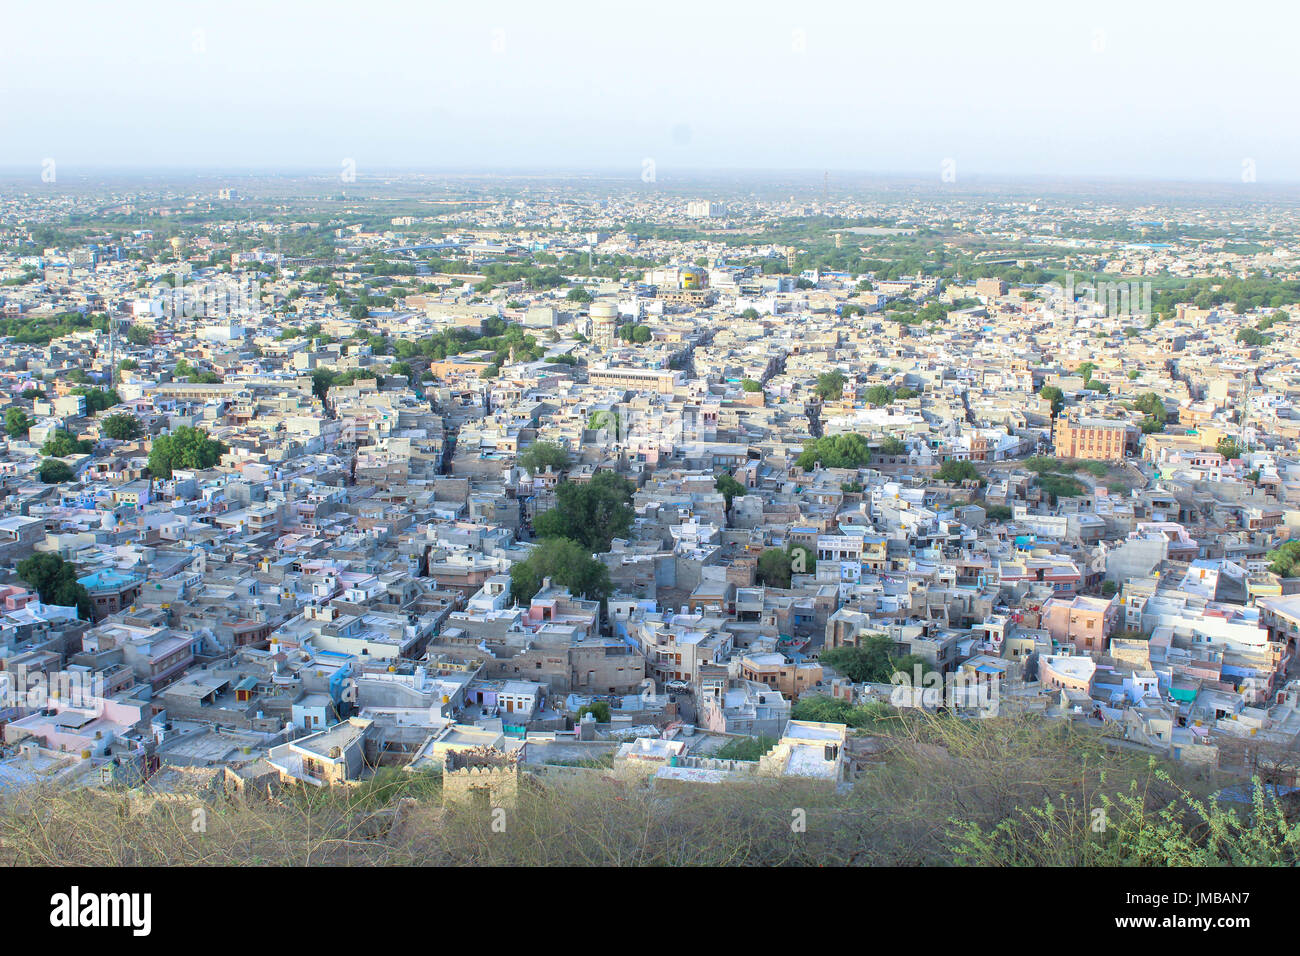 Barmer Rajasthan High Resolution Stock Photography and Images - Alamy